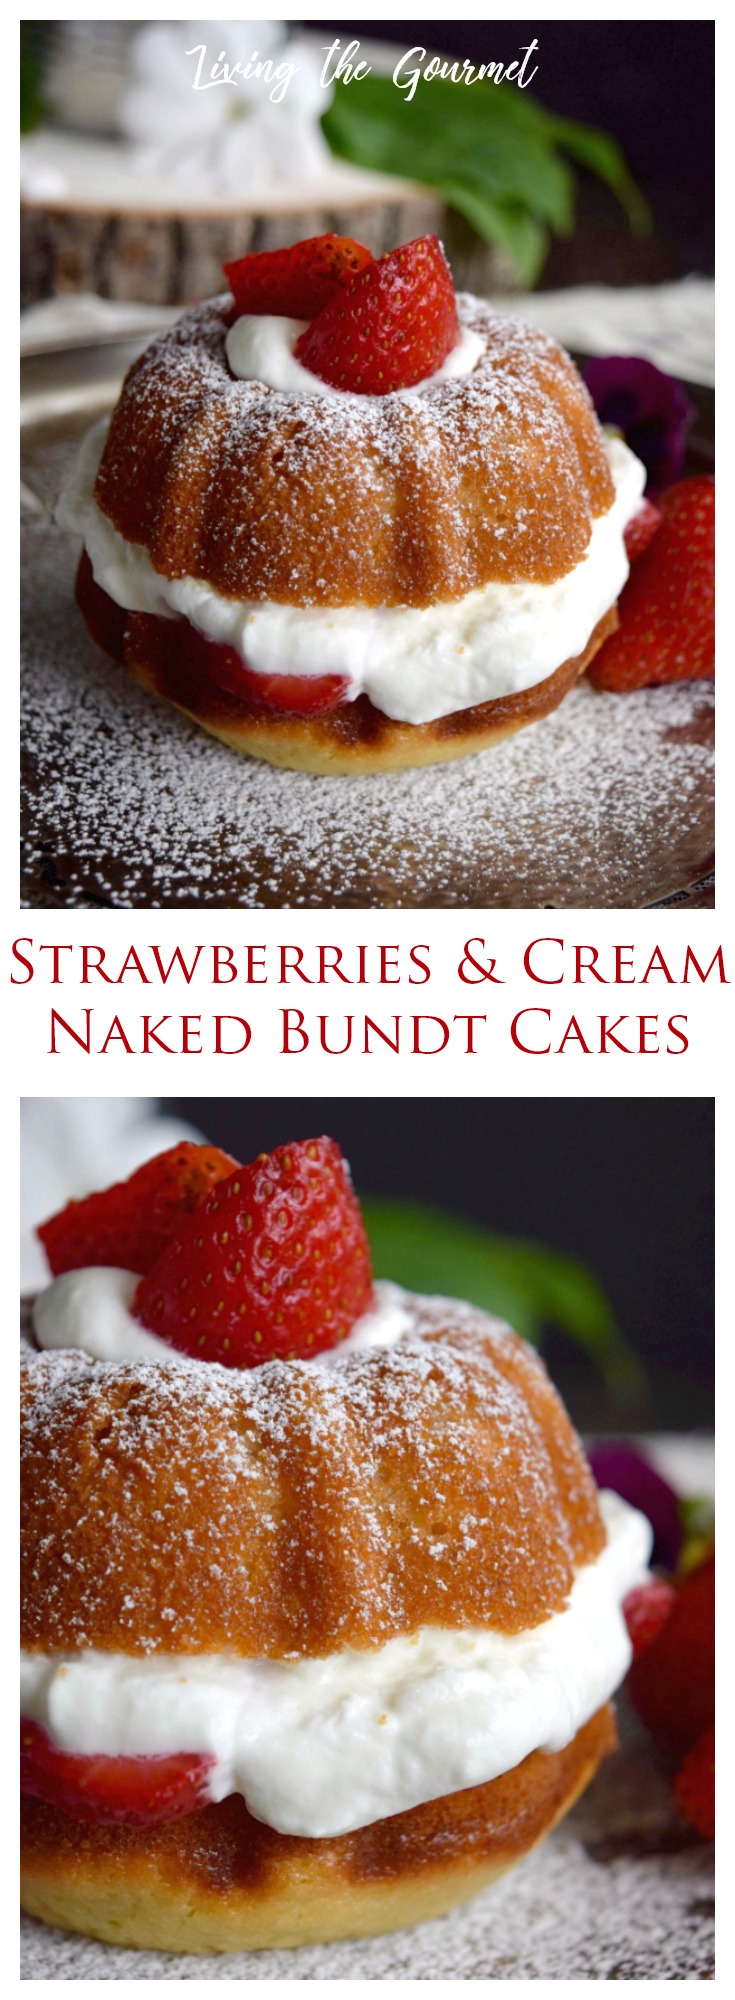 Living the Gourmet: Revamp your favorite strawberry dessert with these Strawberries and Cream Naked Bundt Cakes. #BundtBakers